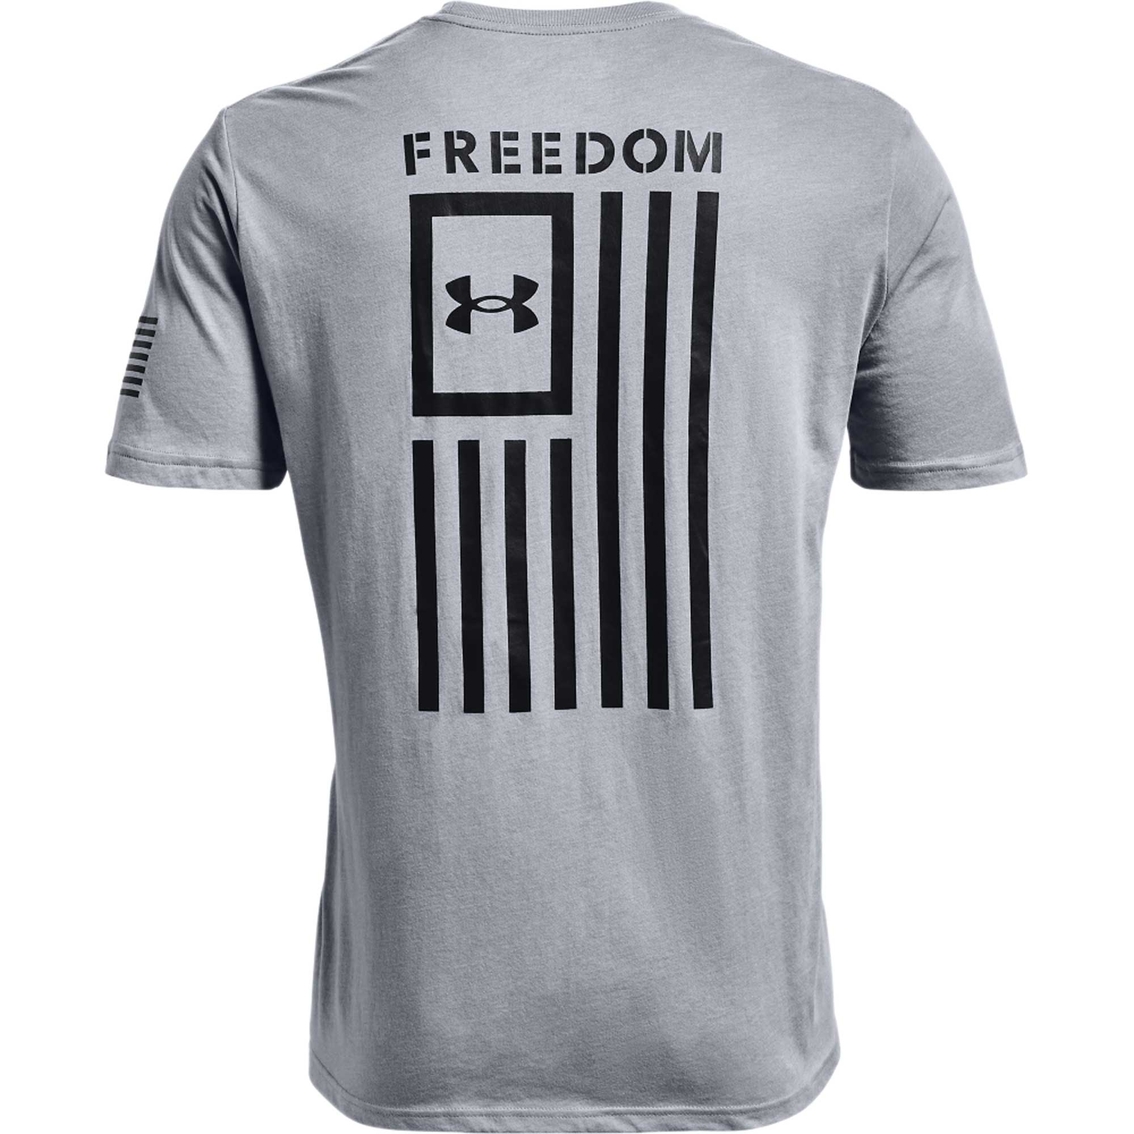 Under Armour New Freedom Flag Tee - Image 6 of 6